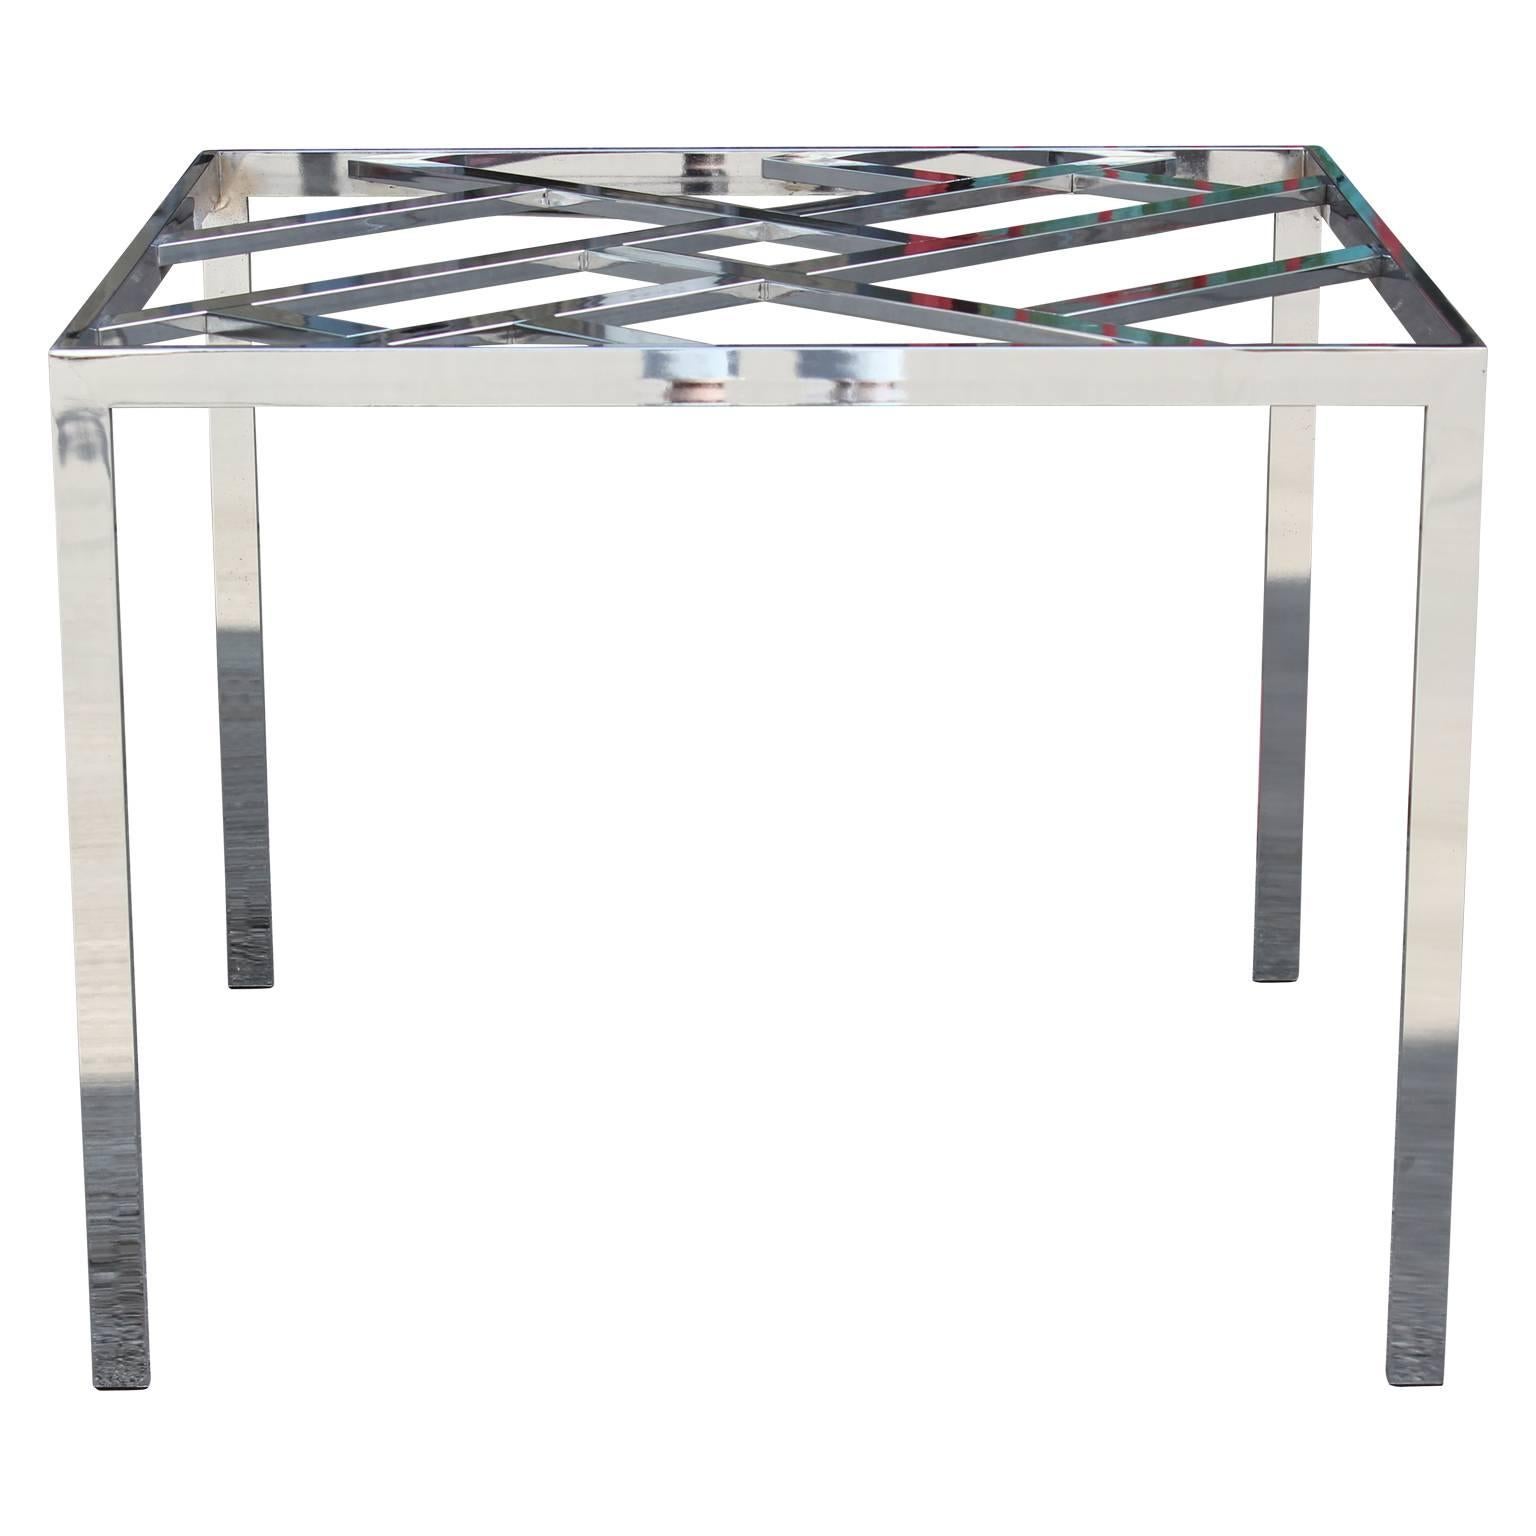 Beautiful square chrome dining table Milo Baughman. Can also be used as a kitchen or card table. We do not have the glass top but we can acquire one if interested.